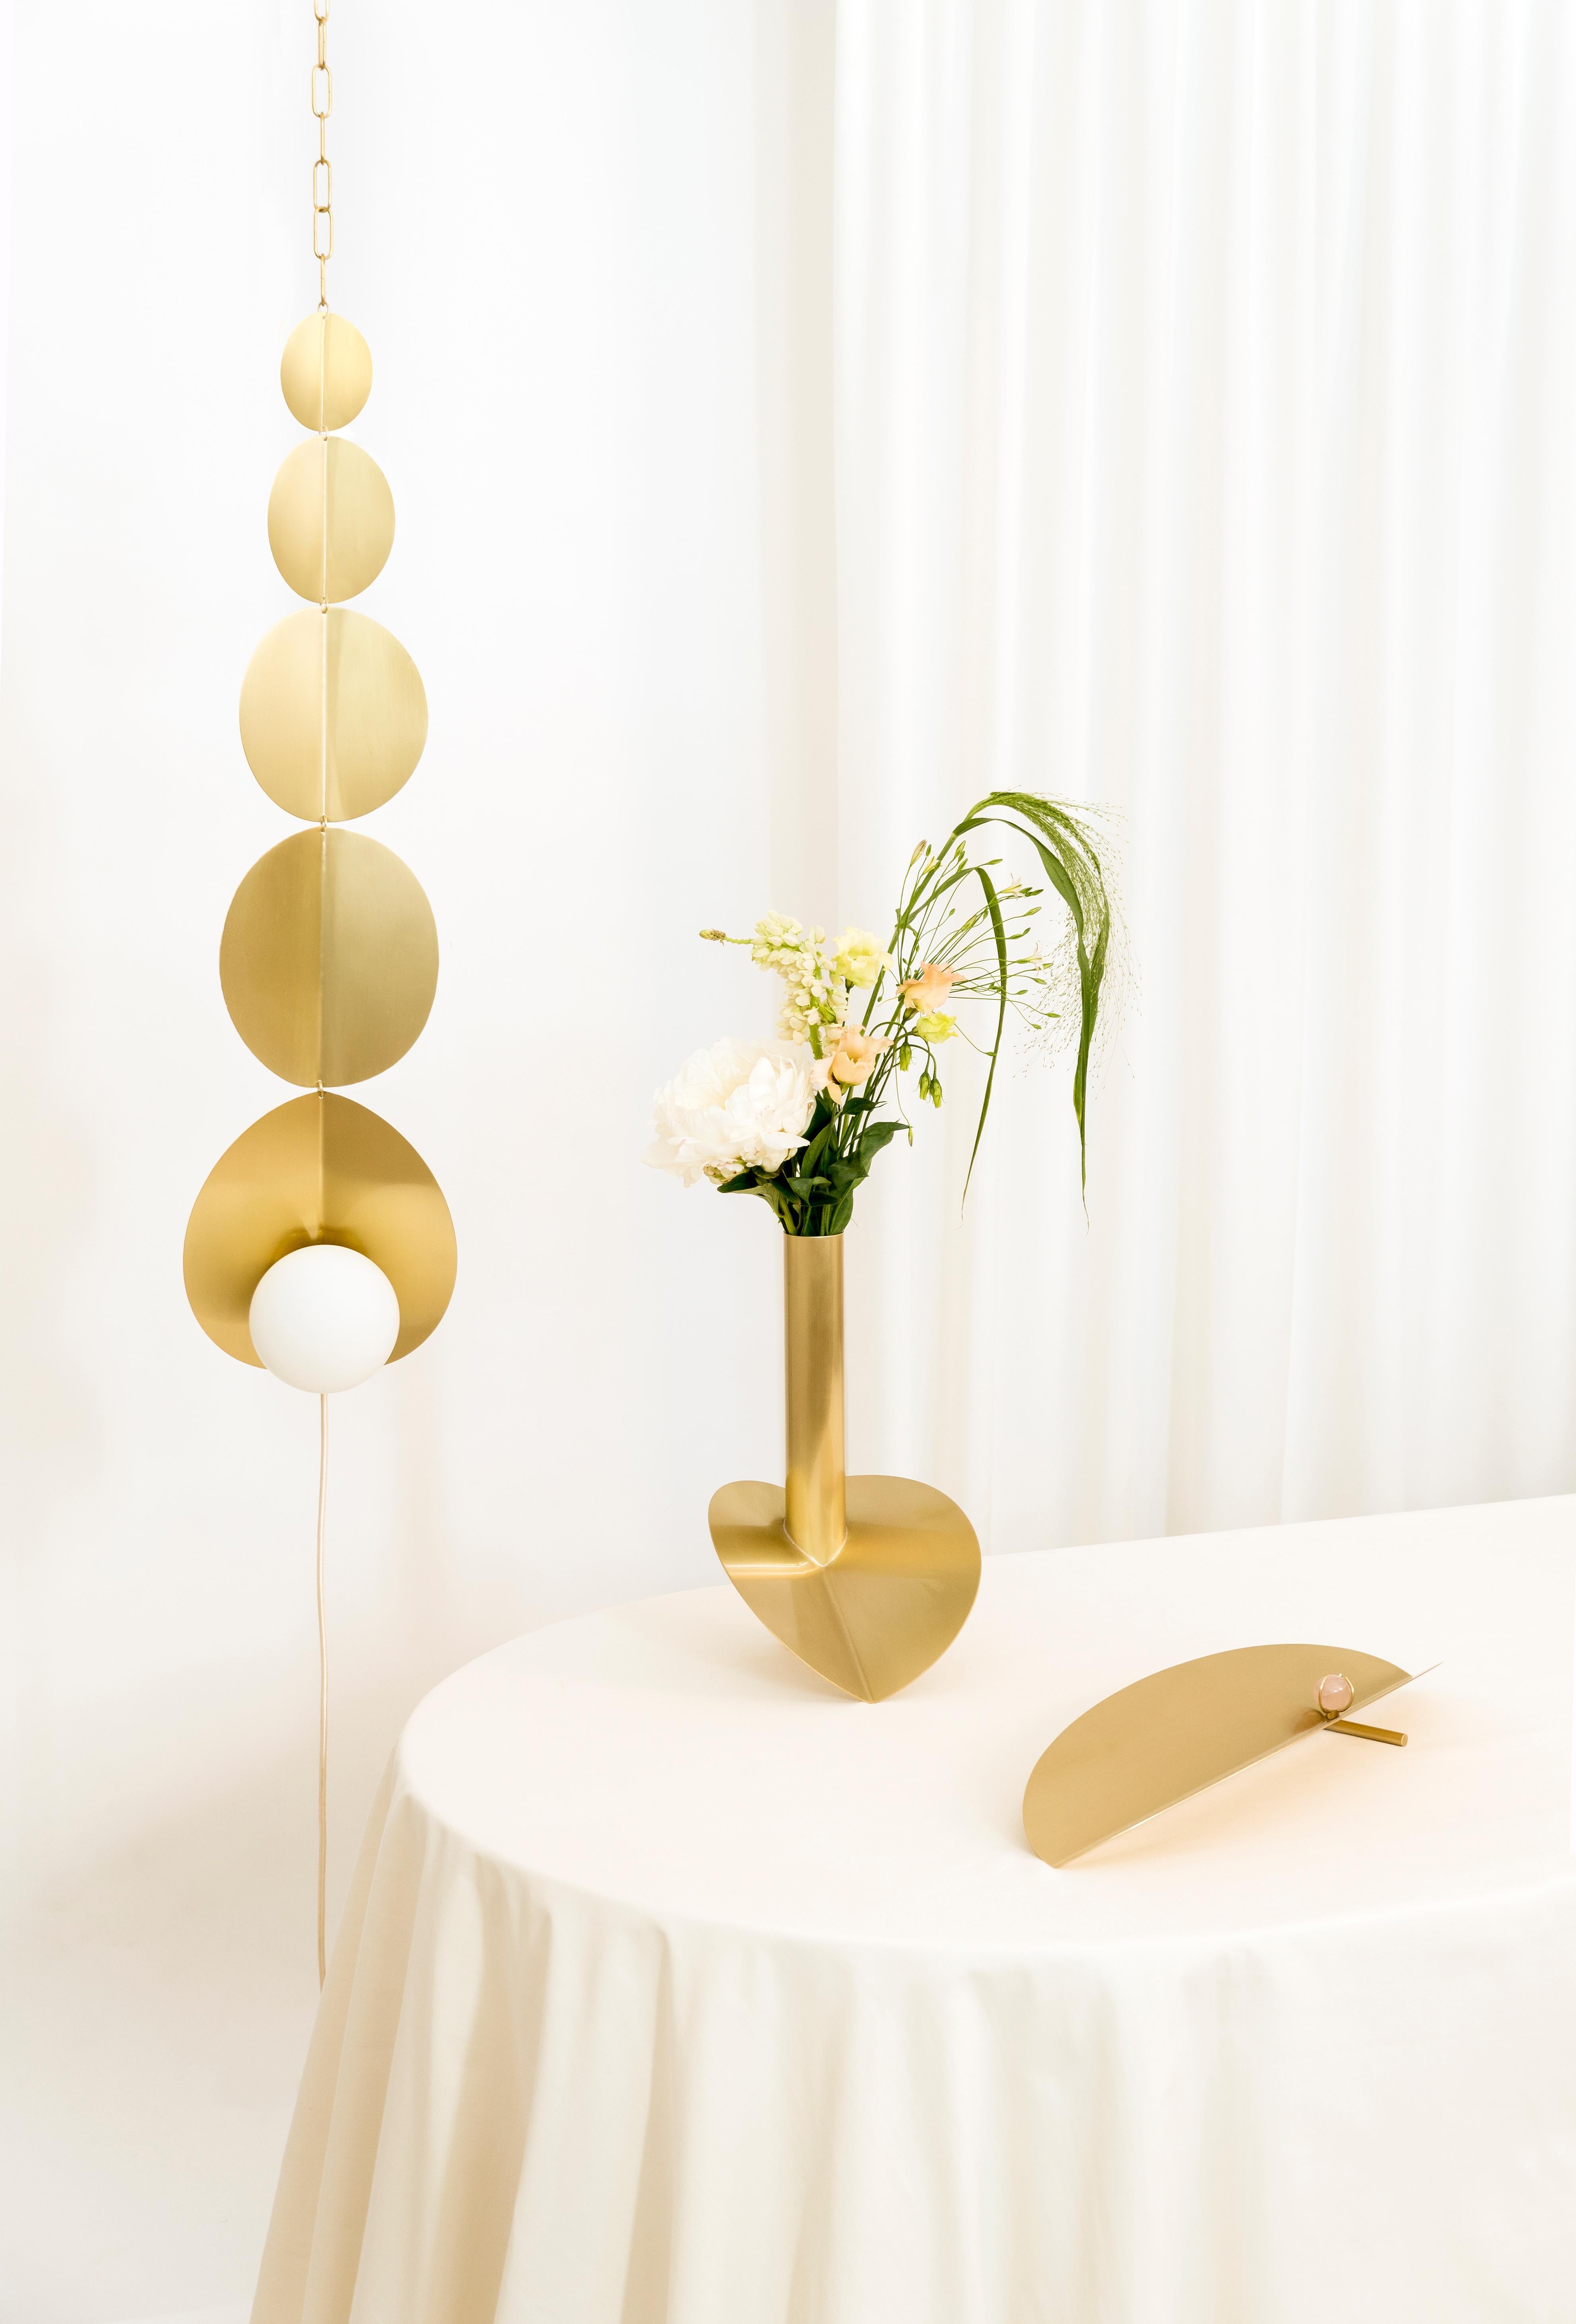 Gynoecium light mobile by Agustina Bottoni
One of a kind.
Materials: solid brass, frosted glass, LED lighting and textile cord.
Dimensions: W 15 x D 24 x H 90 cm.

A suspended sculptural lamp with delicate forms inspired by the botanical